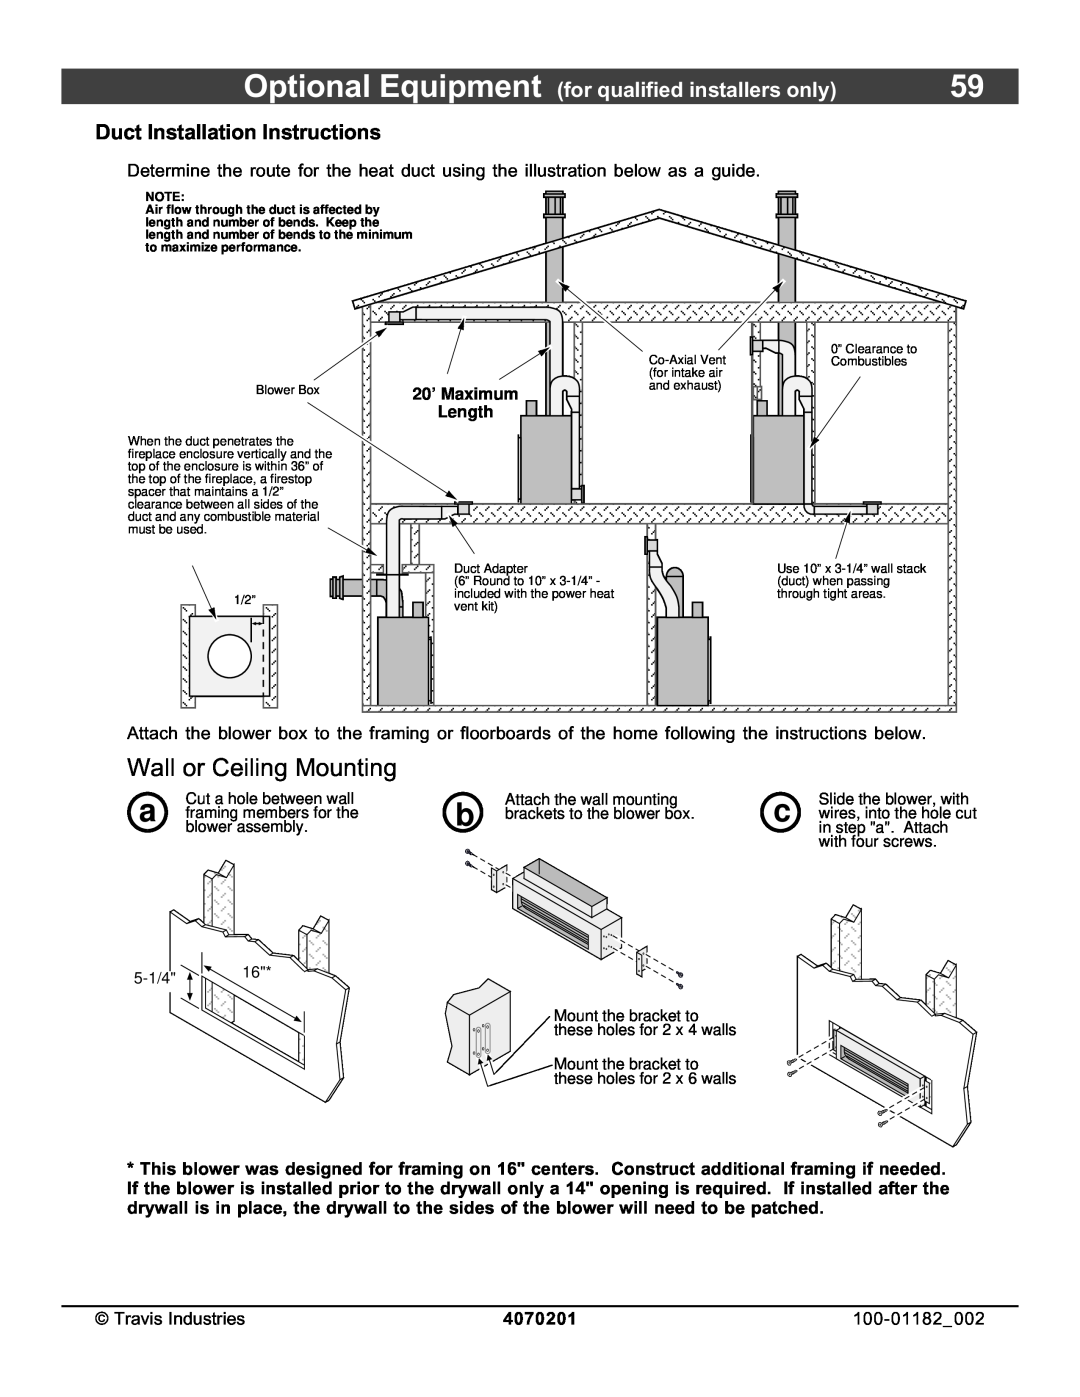 North Star 864 HH installation manual Wall or Ceiling Mounting, Duct Installation Instructions, 4070201 